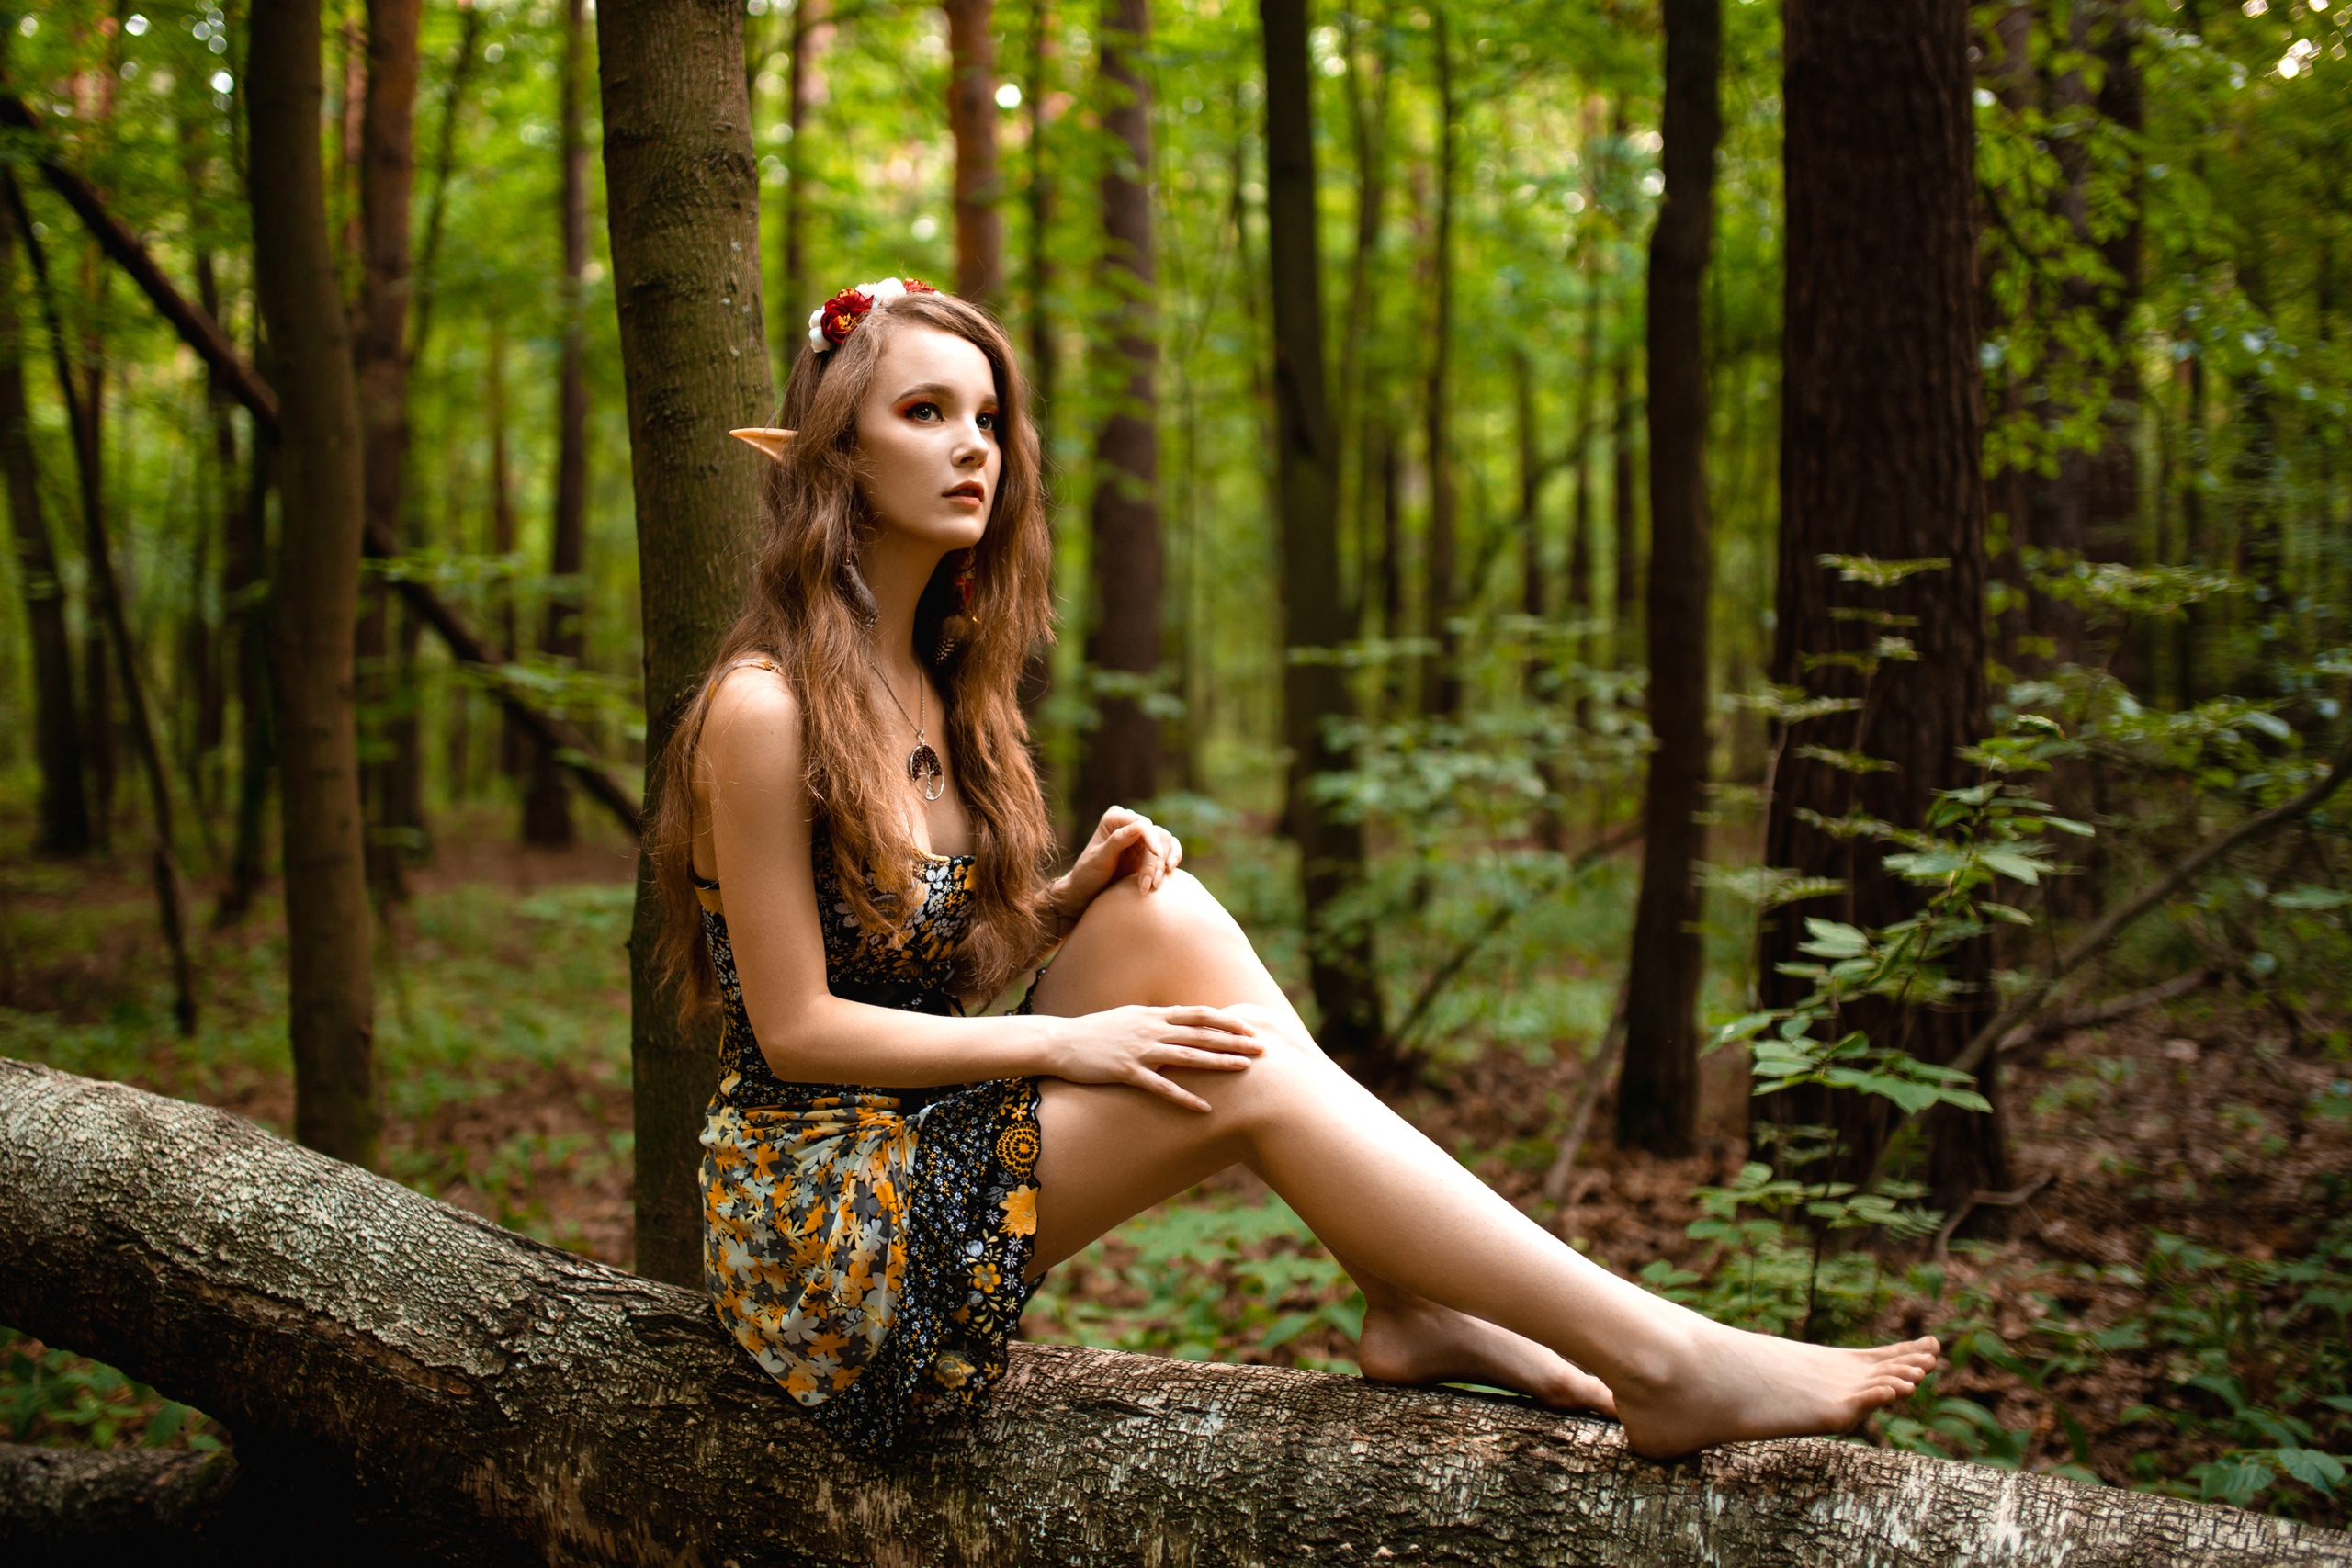 People 2560x1707 Ksana Stankevich women model brunette long hair looking away makeup elves pointy ears cosplay trees log dress outdoors depth of field women outdoors sitting flower in hair necklace fantasy girl barefoot cleavage forest ground leaves branch pointed toes parted lips